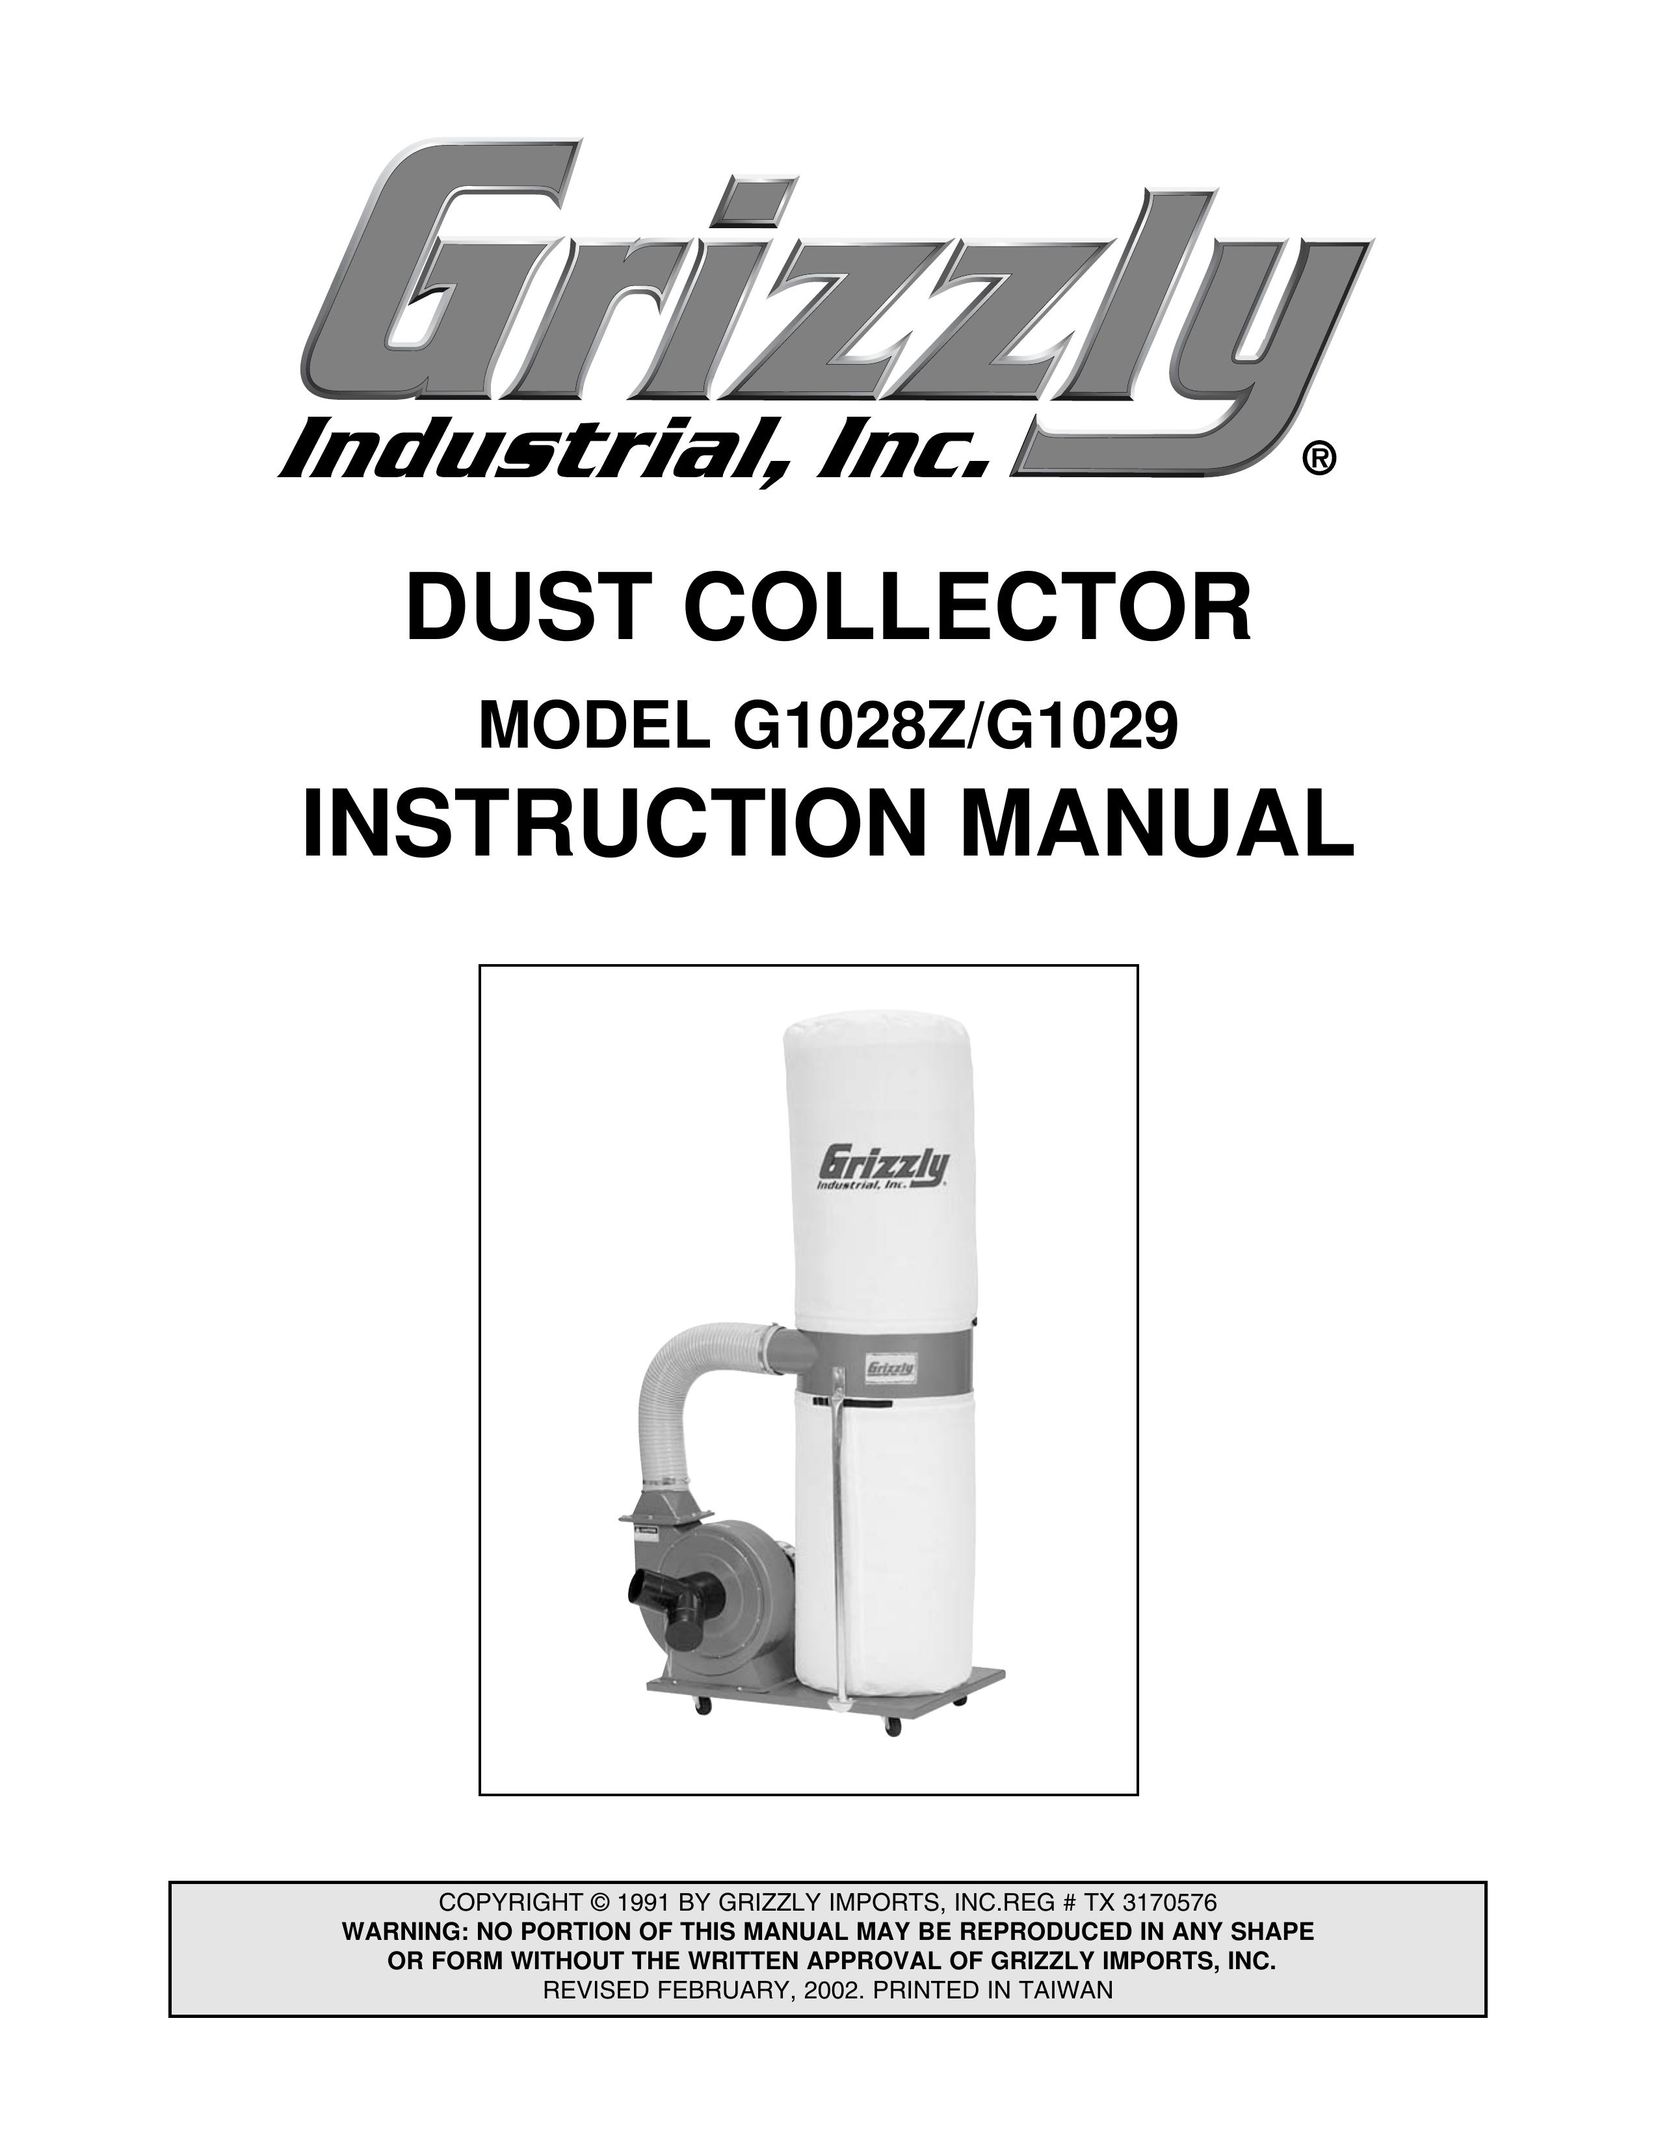 Grizzly G1029 Dust Collector User Manual